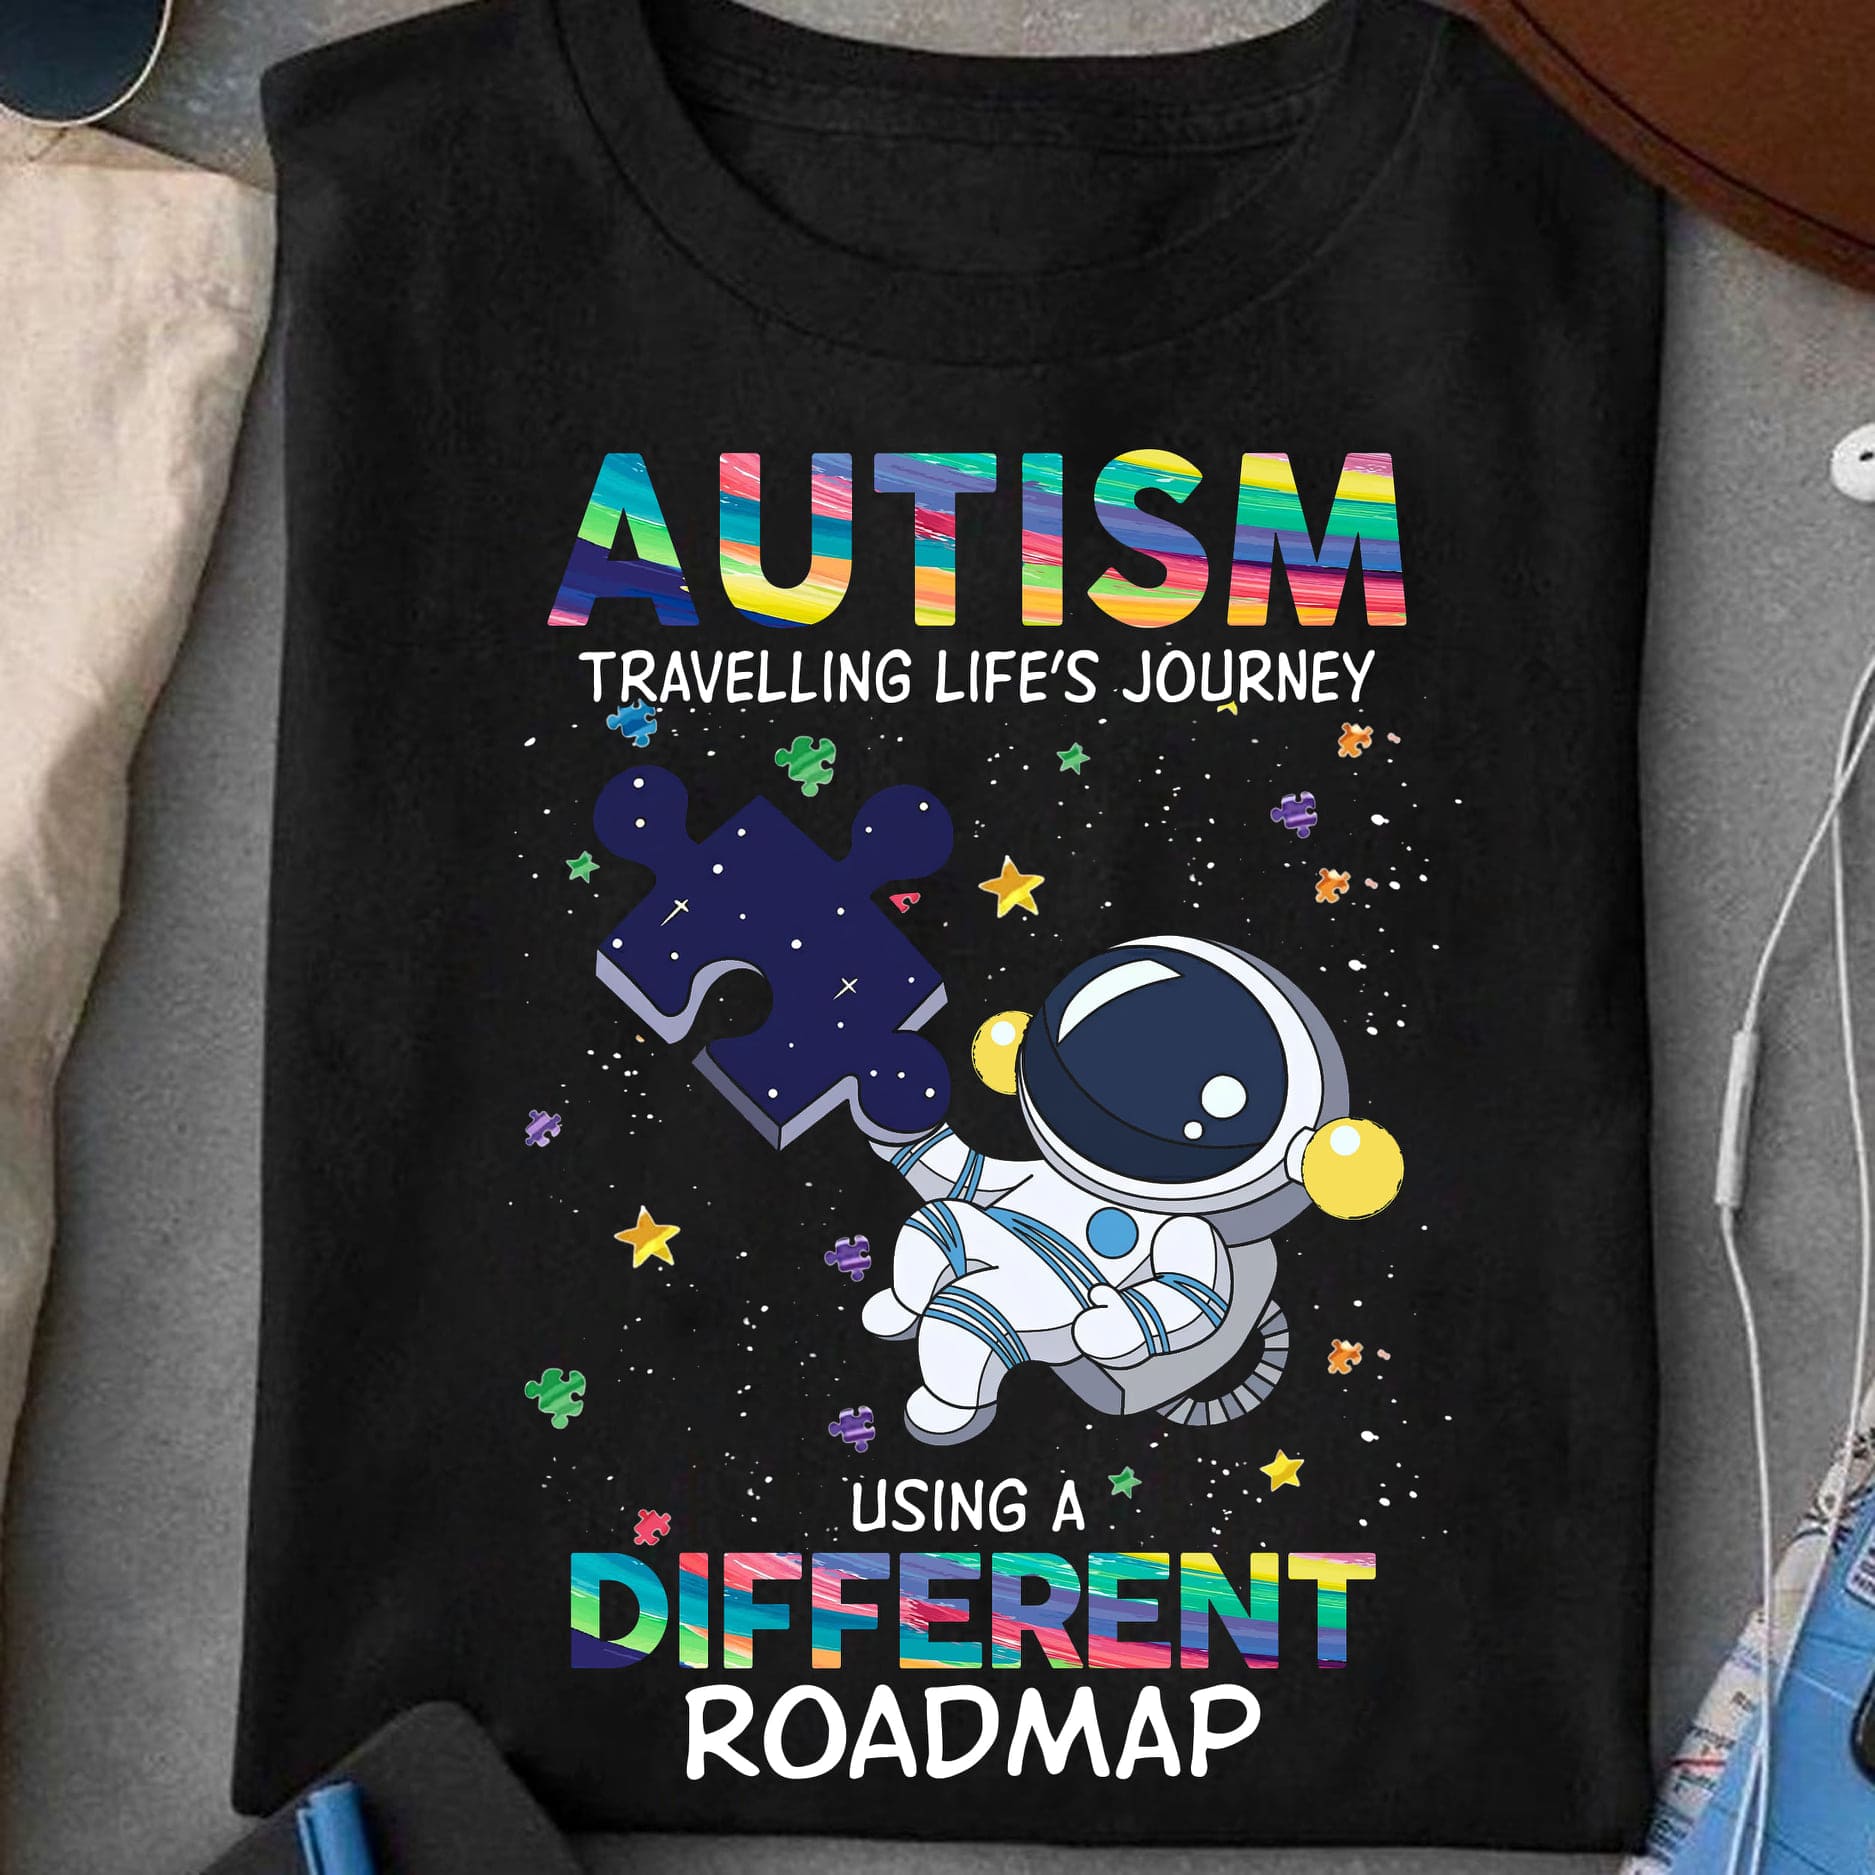 Autism awareness - Travelling life's journey using a different roadmap, Autism astronaut